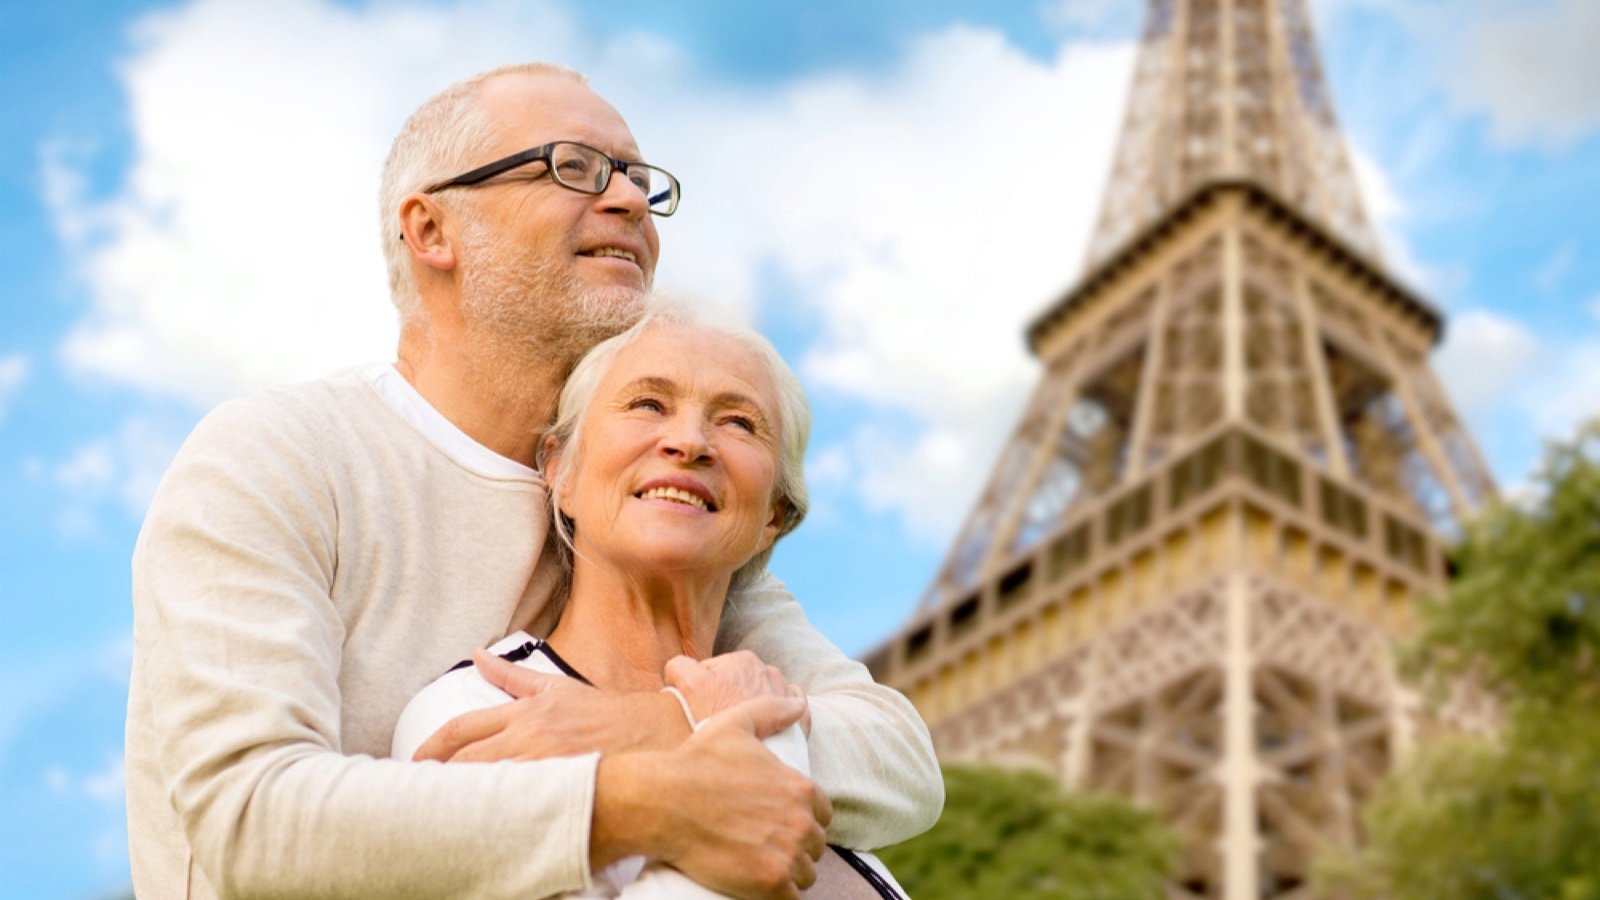 <p>Baby boomers, born from 1945 to 1964, love to travel. They account for about 80% of luxury travel spending and enjoy traveling across the globe to their favorite destinations, from the exotic to the action-packed.</p> <p>Prepare for adventure and discover some favorite baby boomer destinations to add to your bucket list.</p>